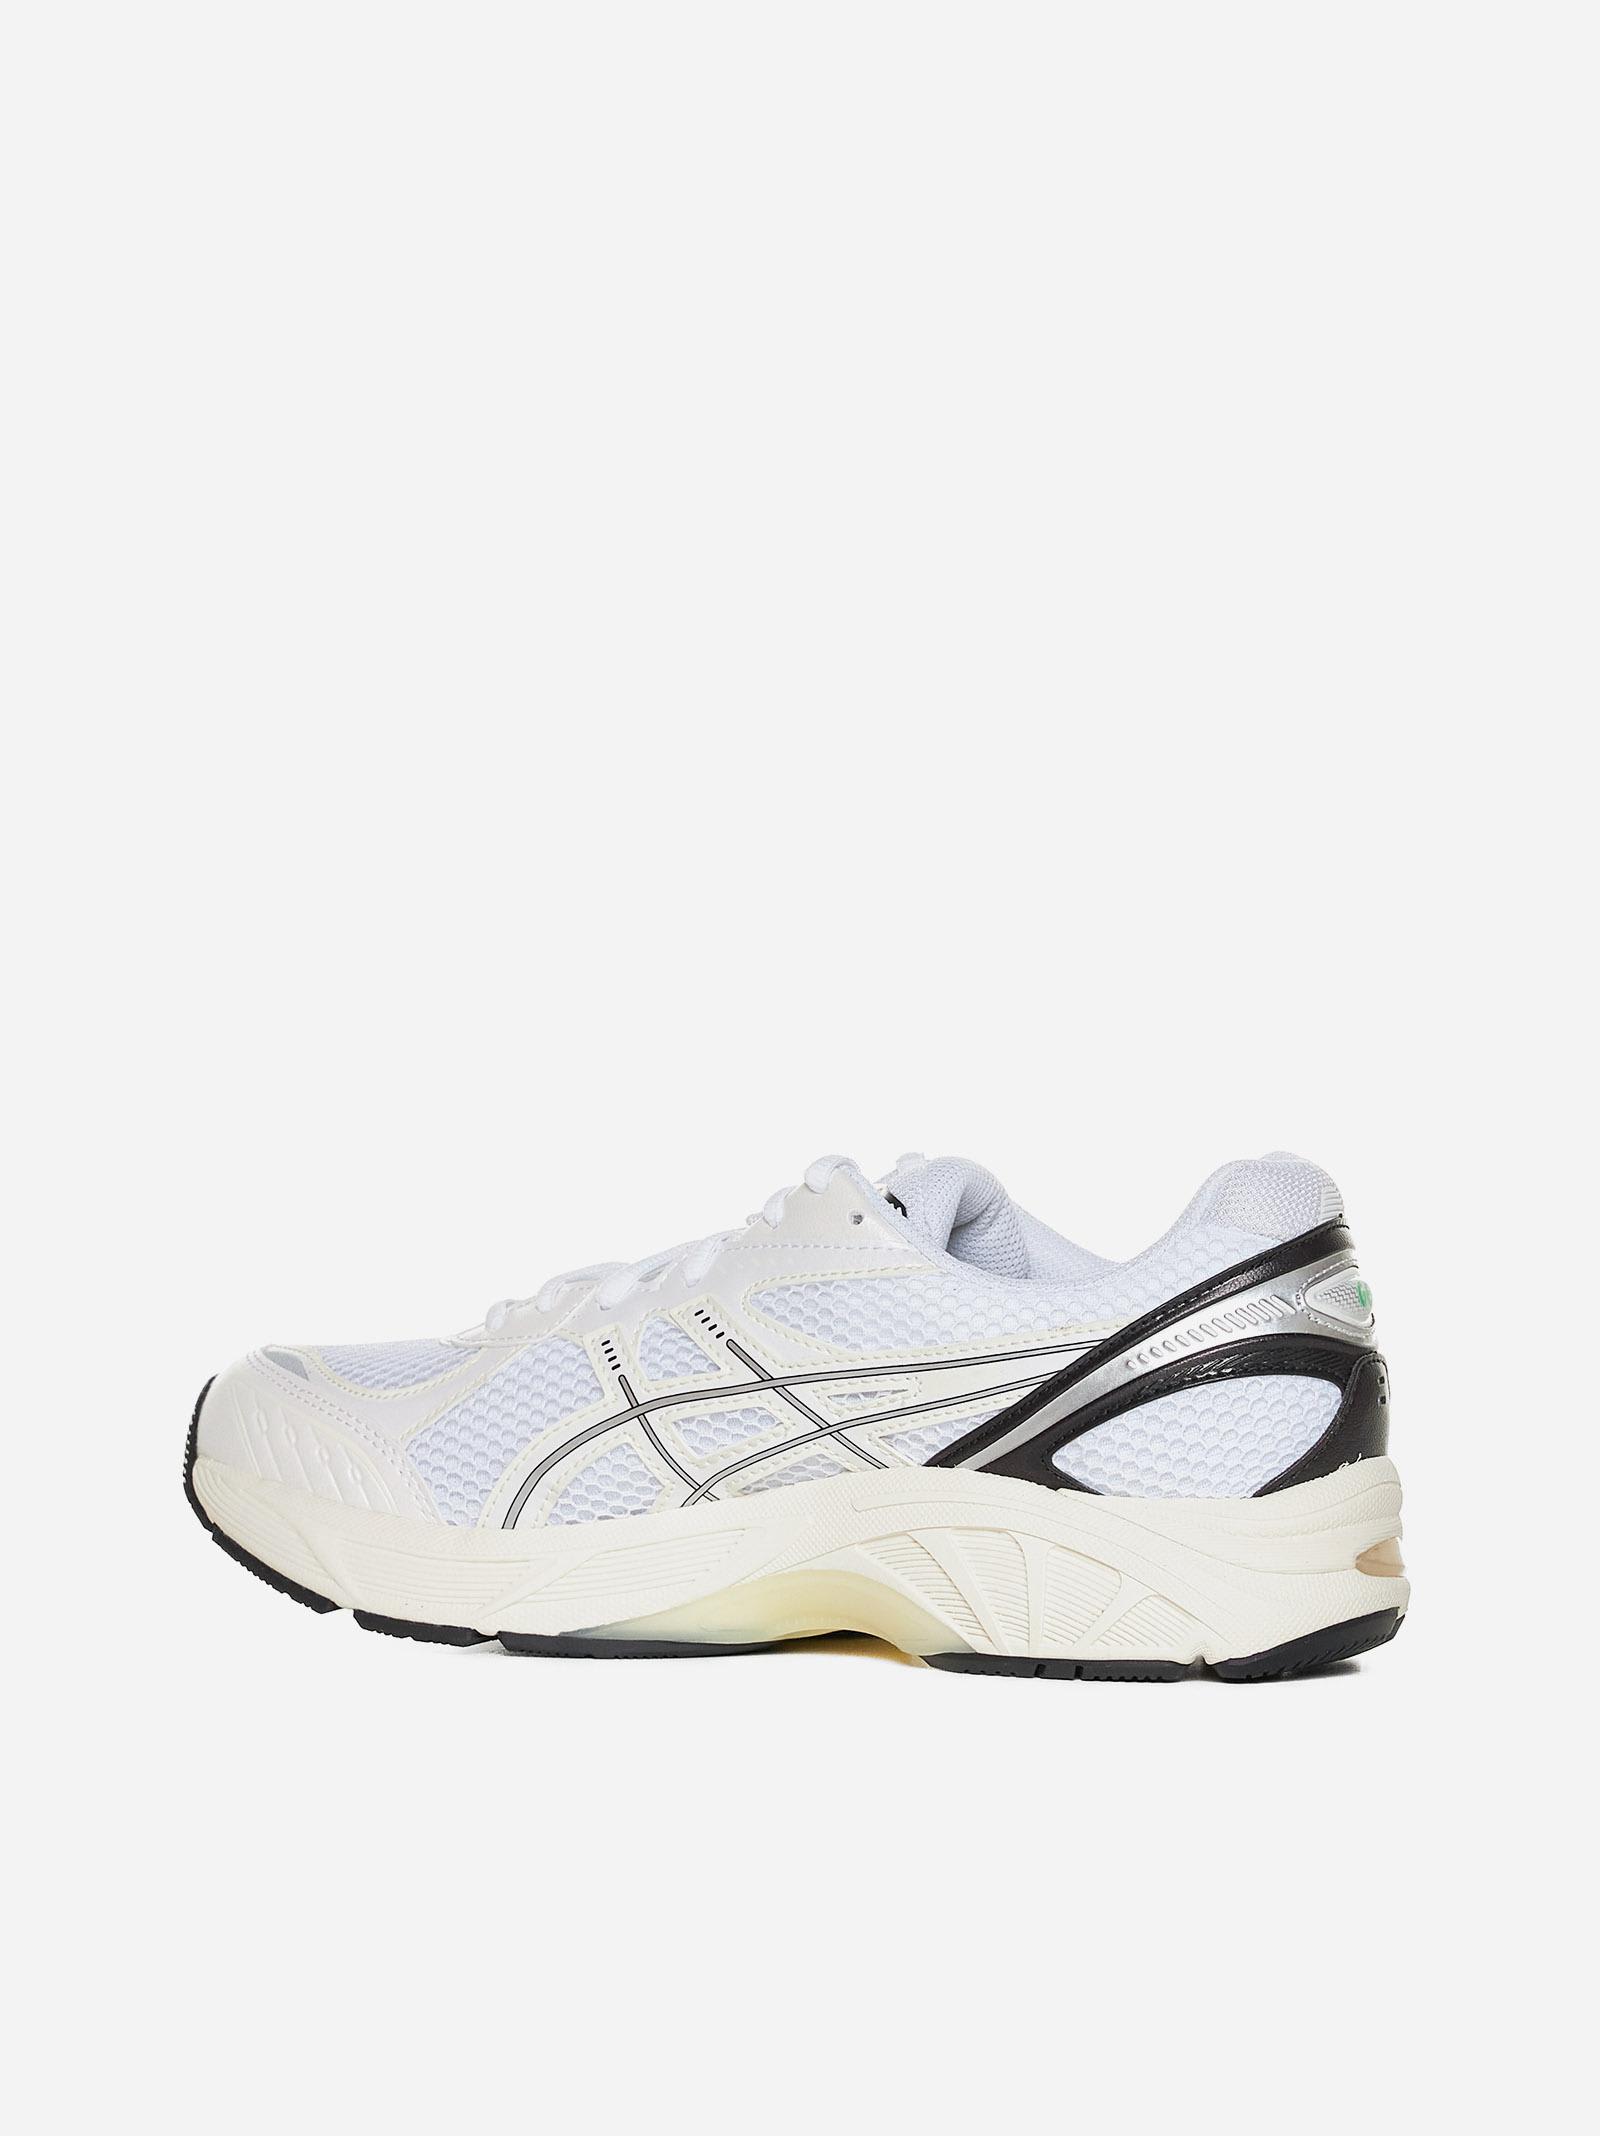 Shop Asics Gt-2160 Sneakers In White/black